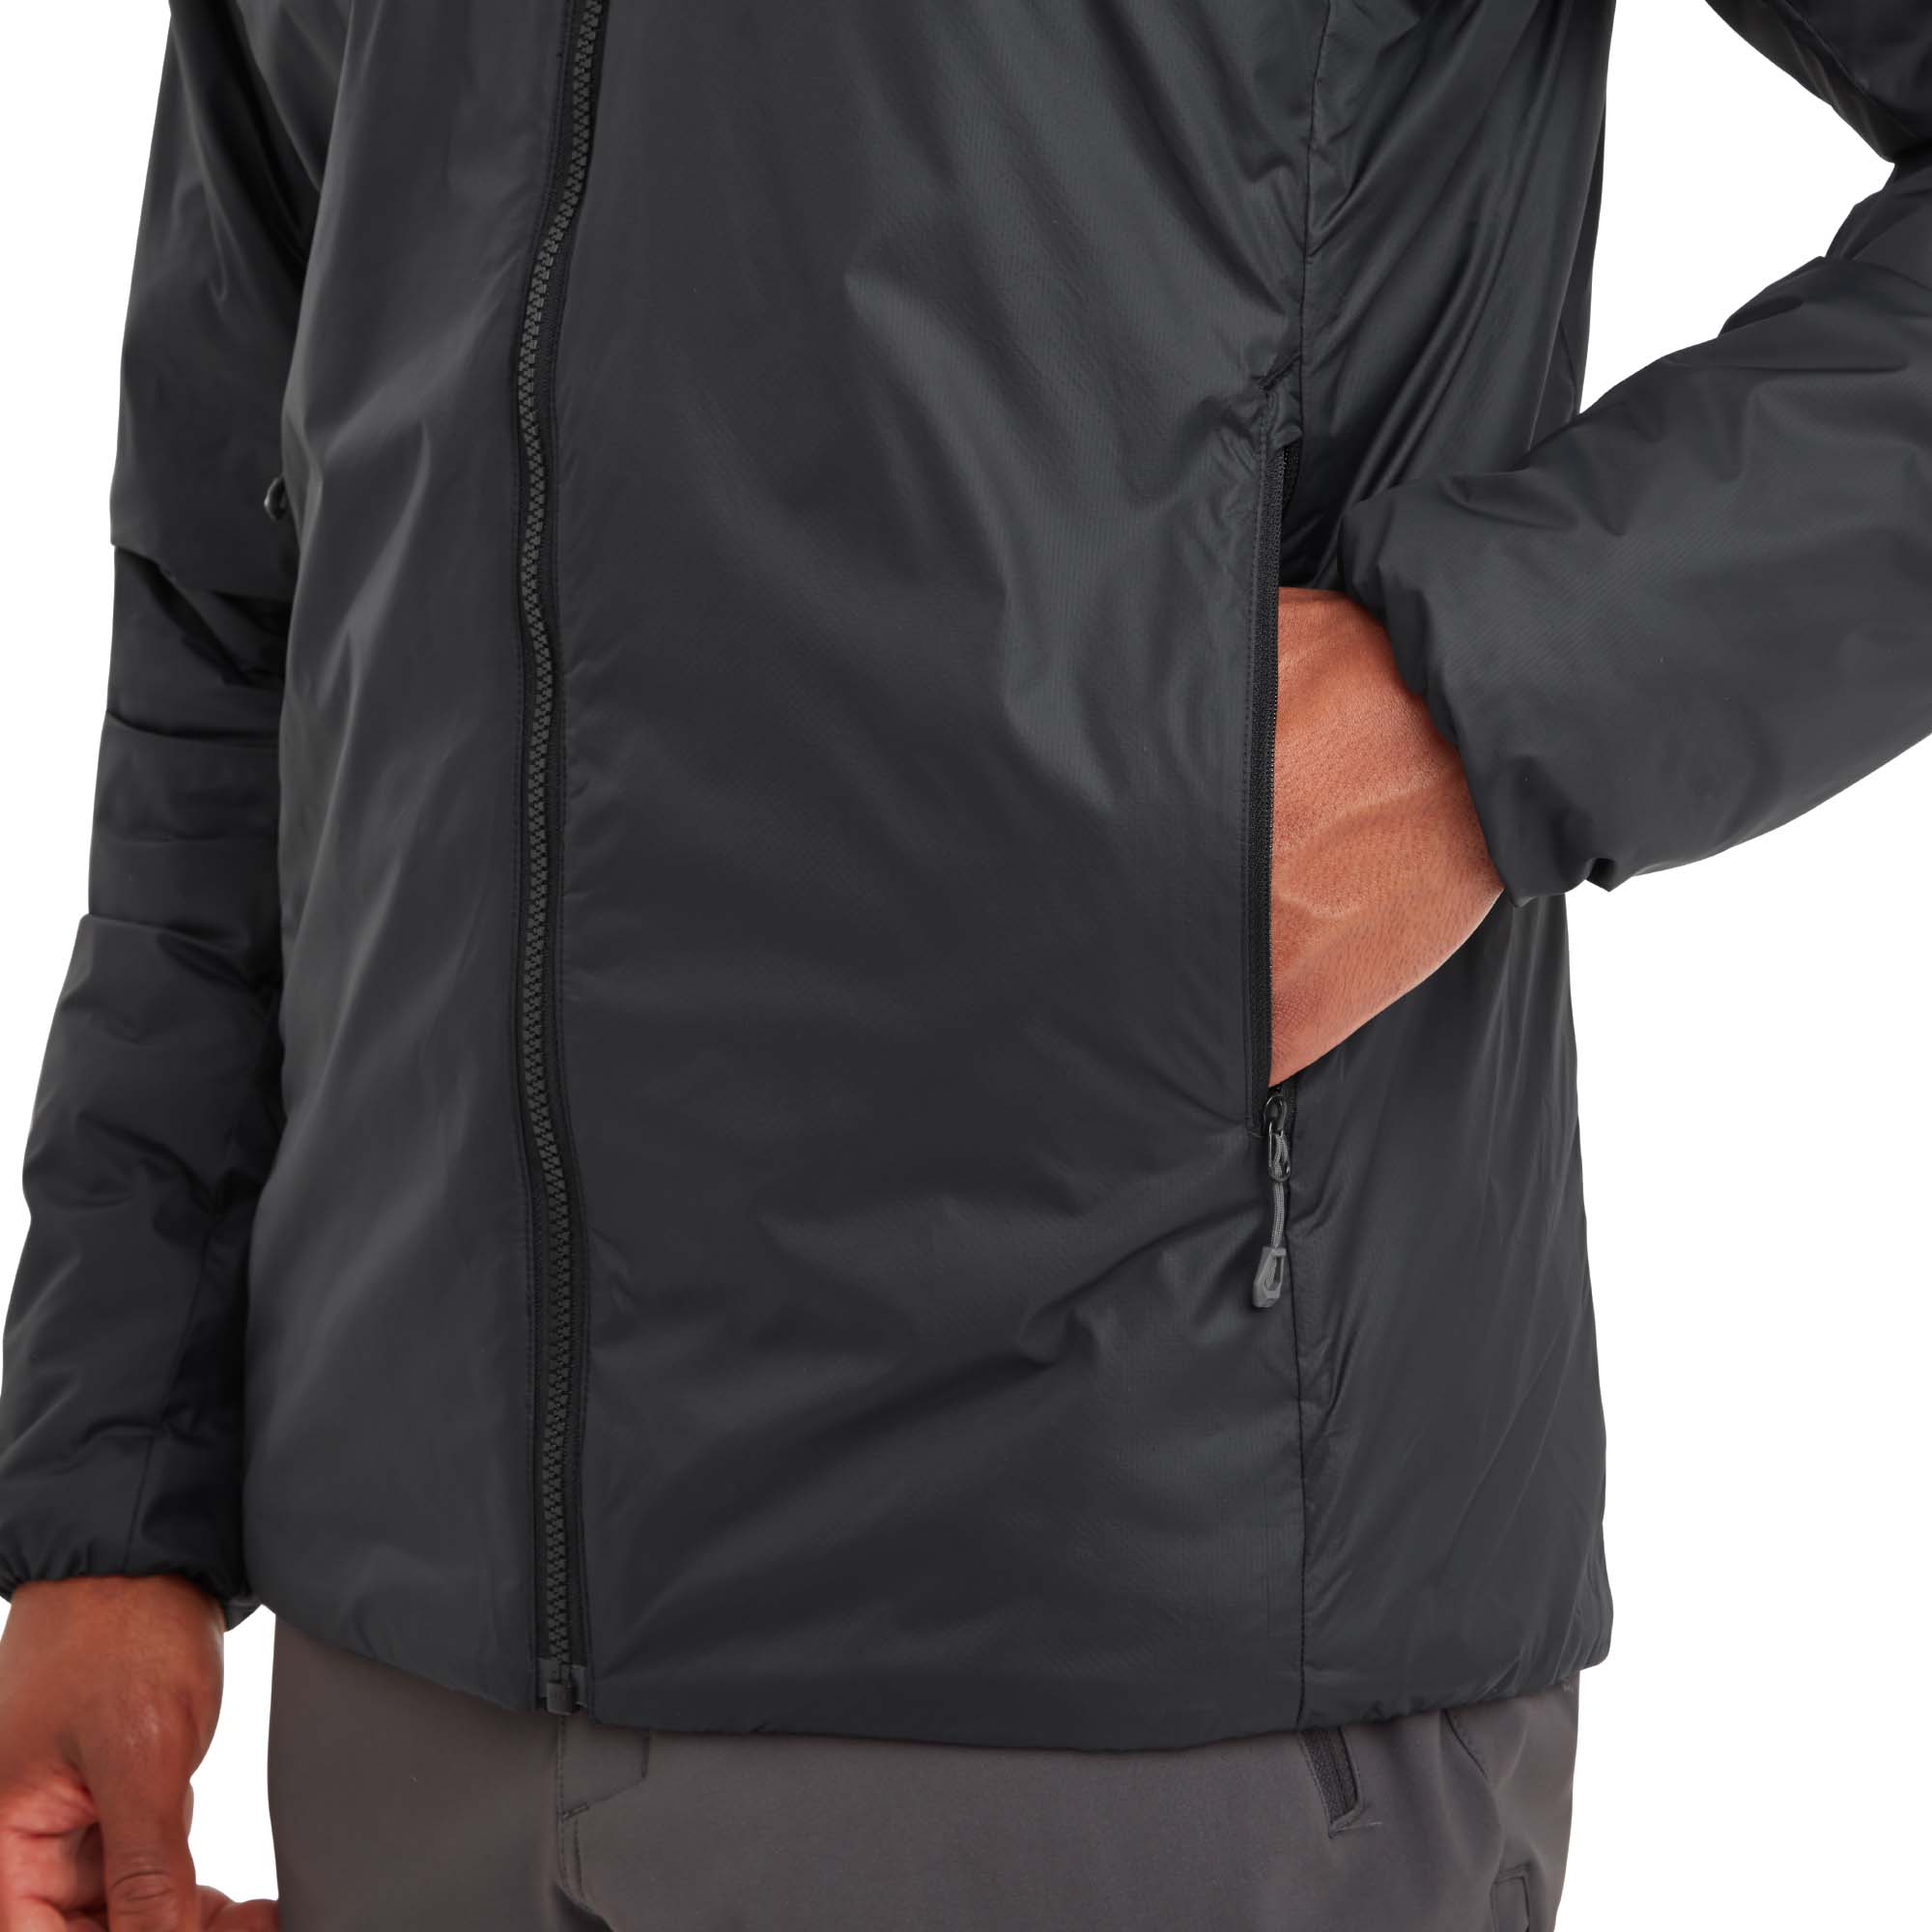 Montane Respond  Insulated Hooded Jacket